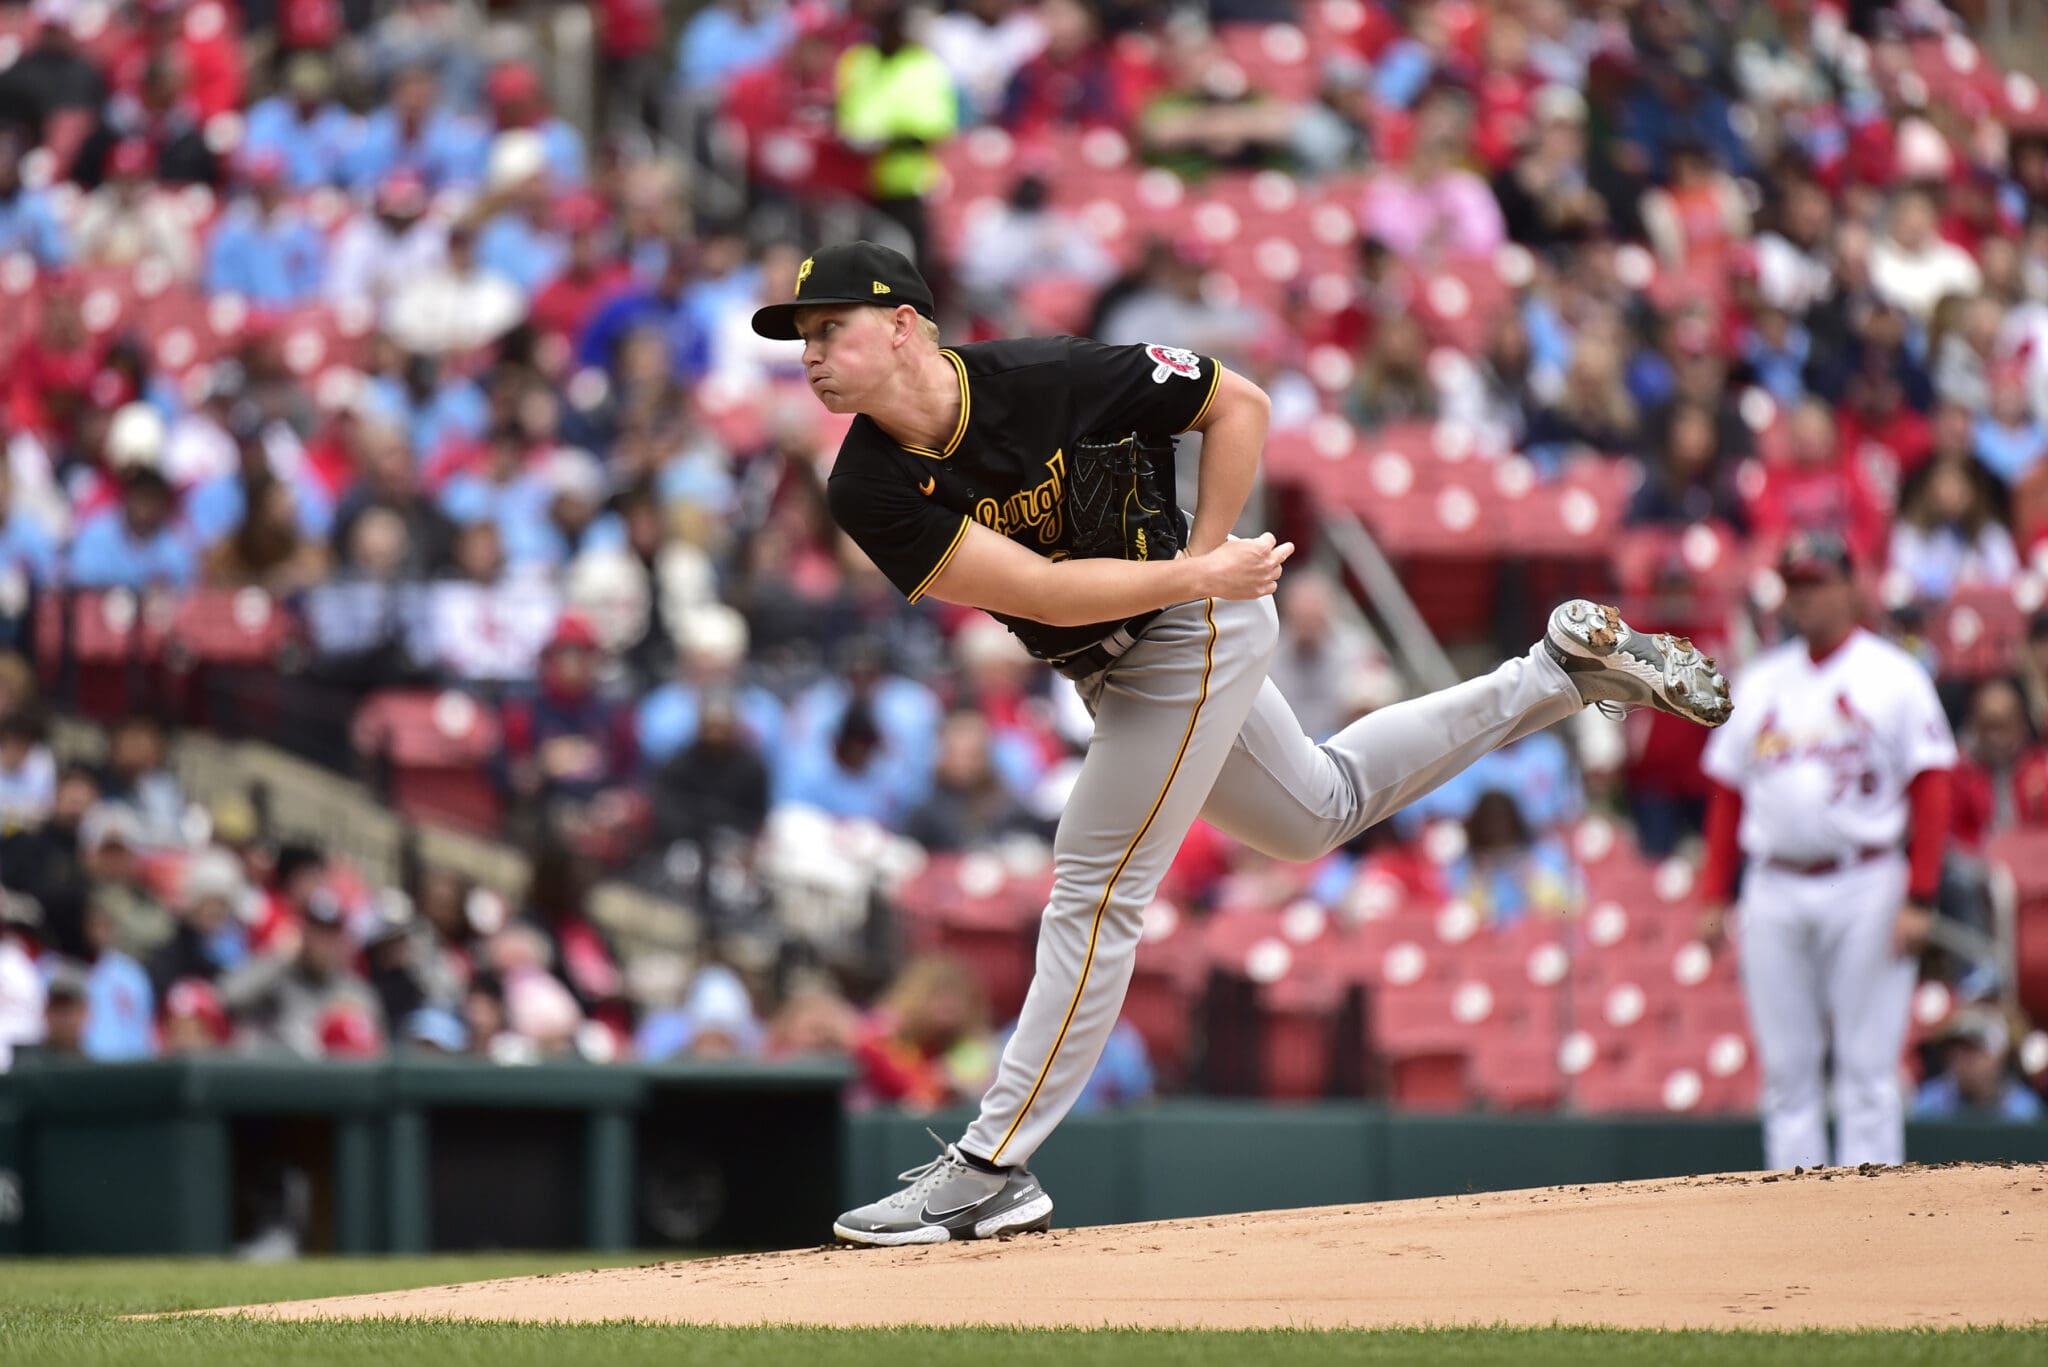 Kent Tekulve will sign off at the end of the Pirates season